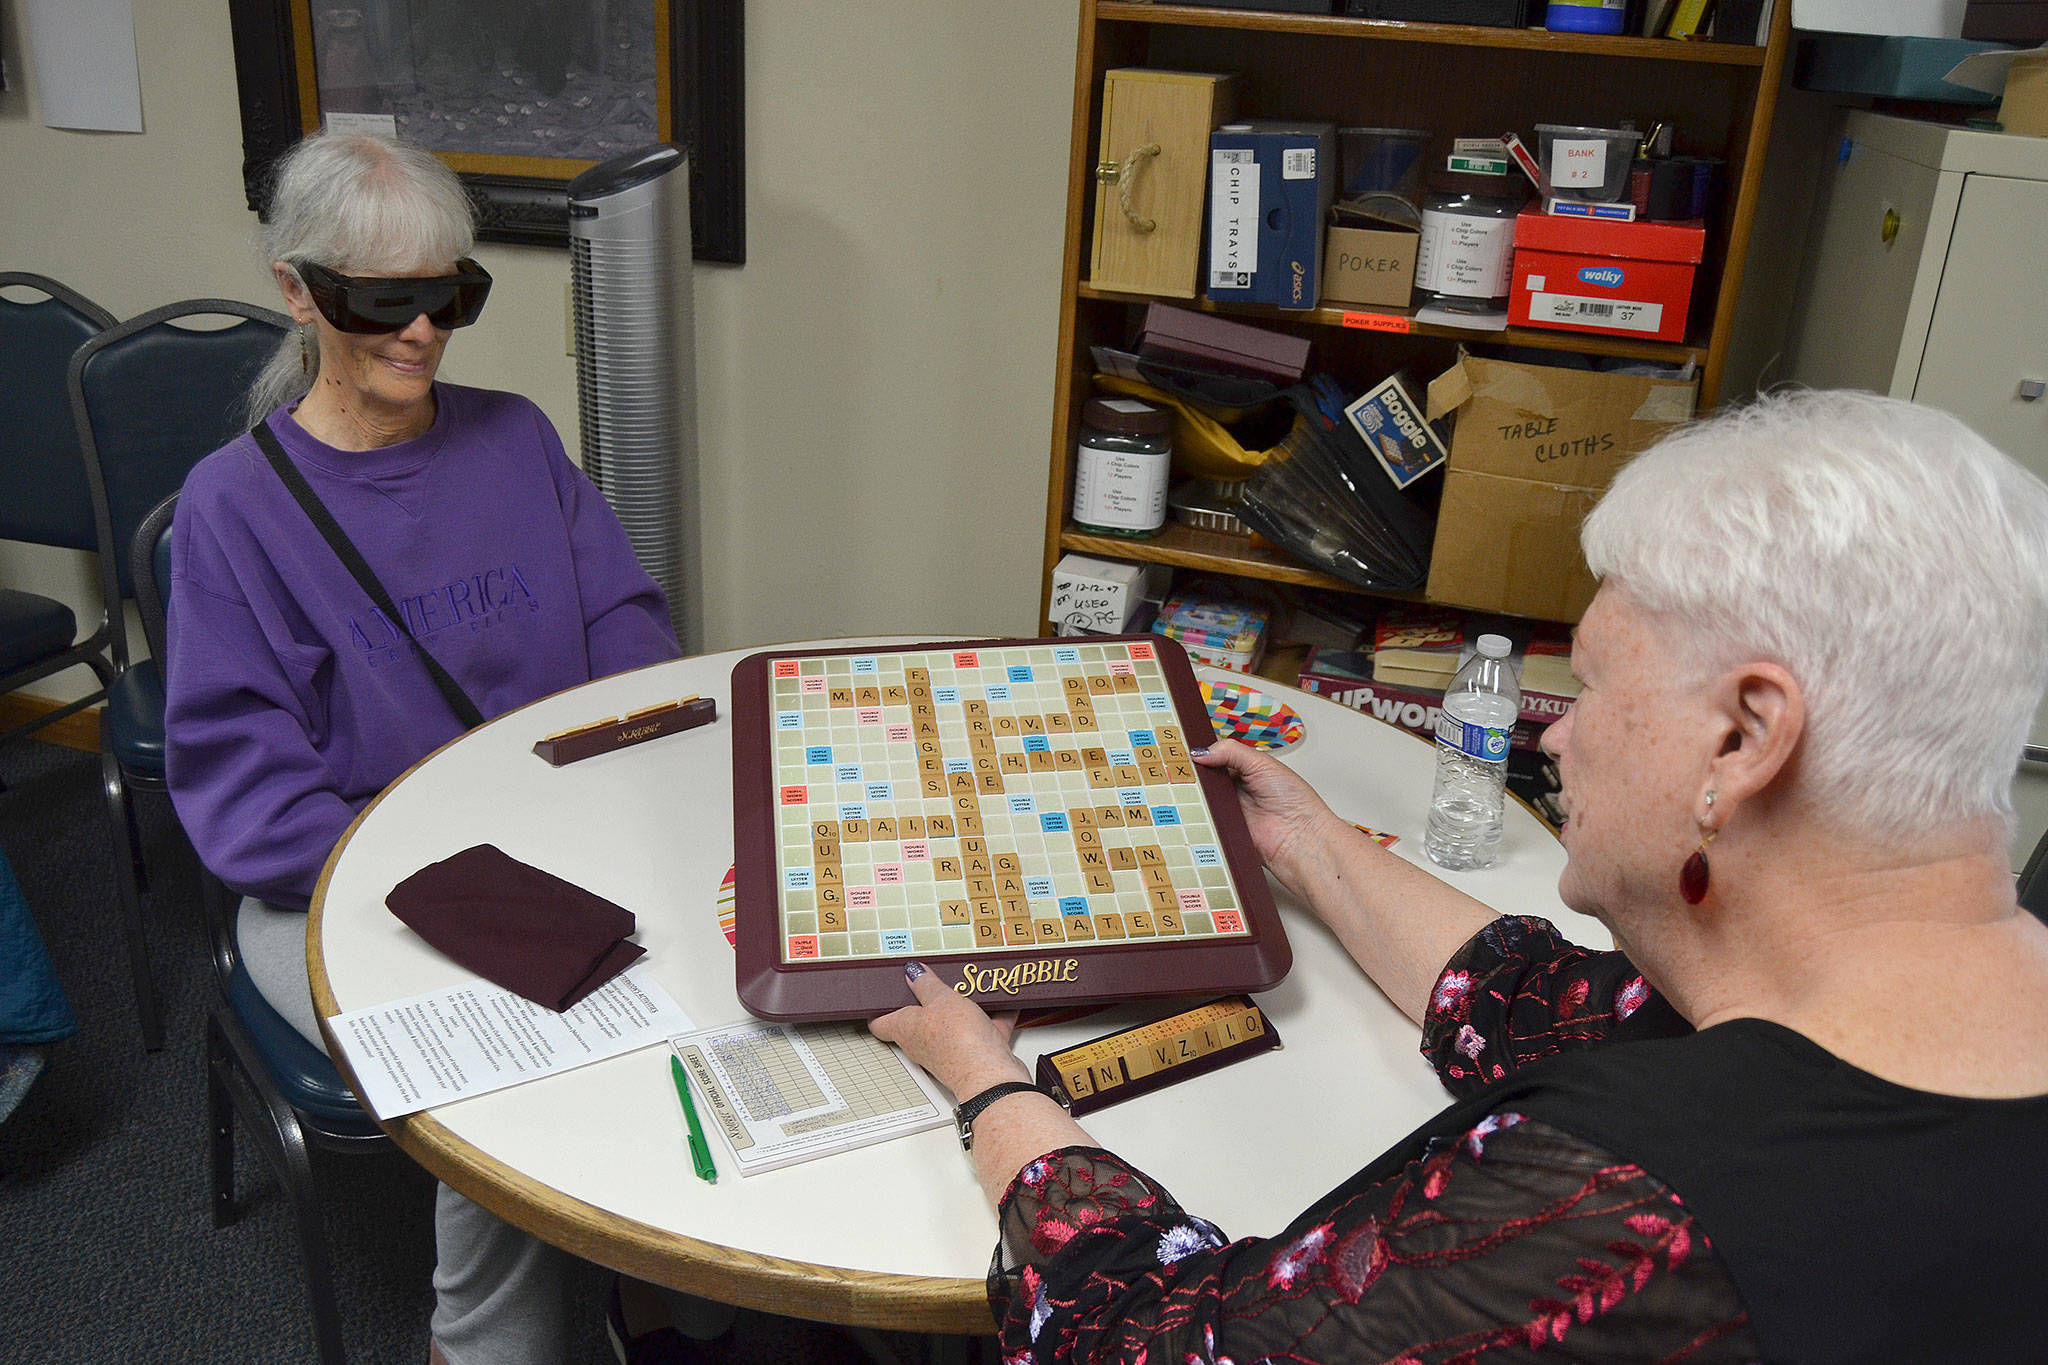 Bobbie Dahn shows her “bingo” in a game of Scrabble against Marilyn Van Patter where she opened the game with the word “actuate” using all seven of her tiles earning 50 additional points. Dahn has led Scrabble for 17 years at Shipley Center. Matthew Nash/Olympic Peninsula News Group